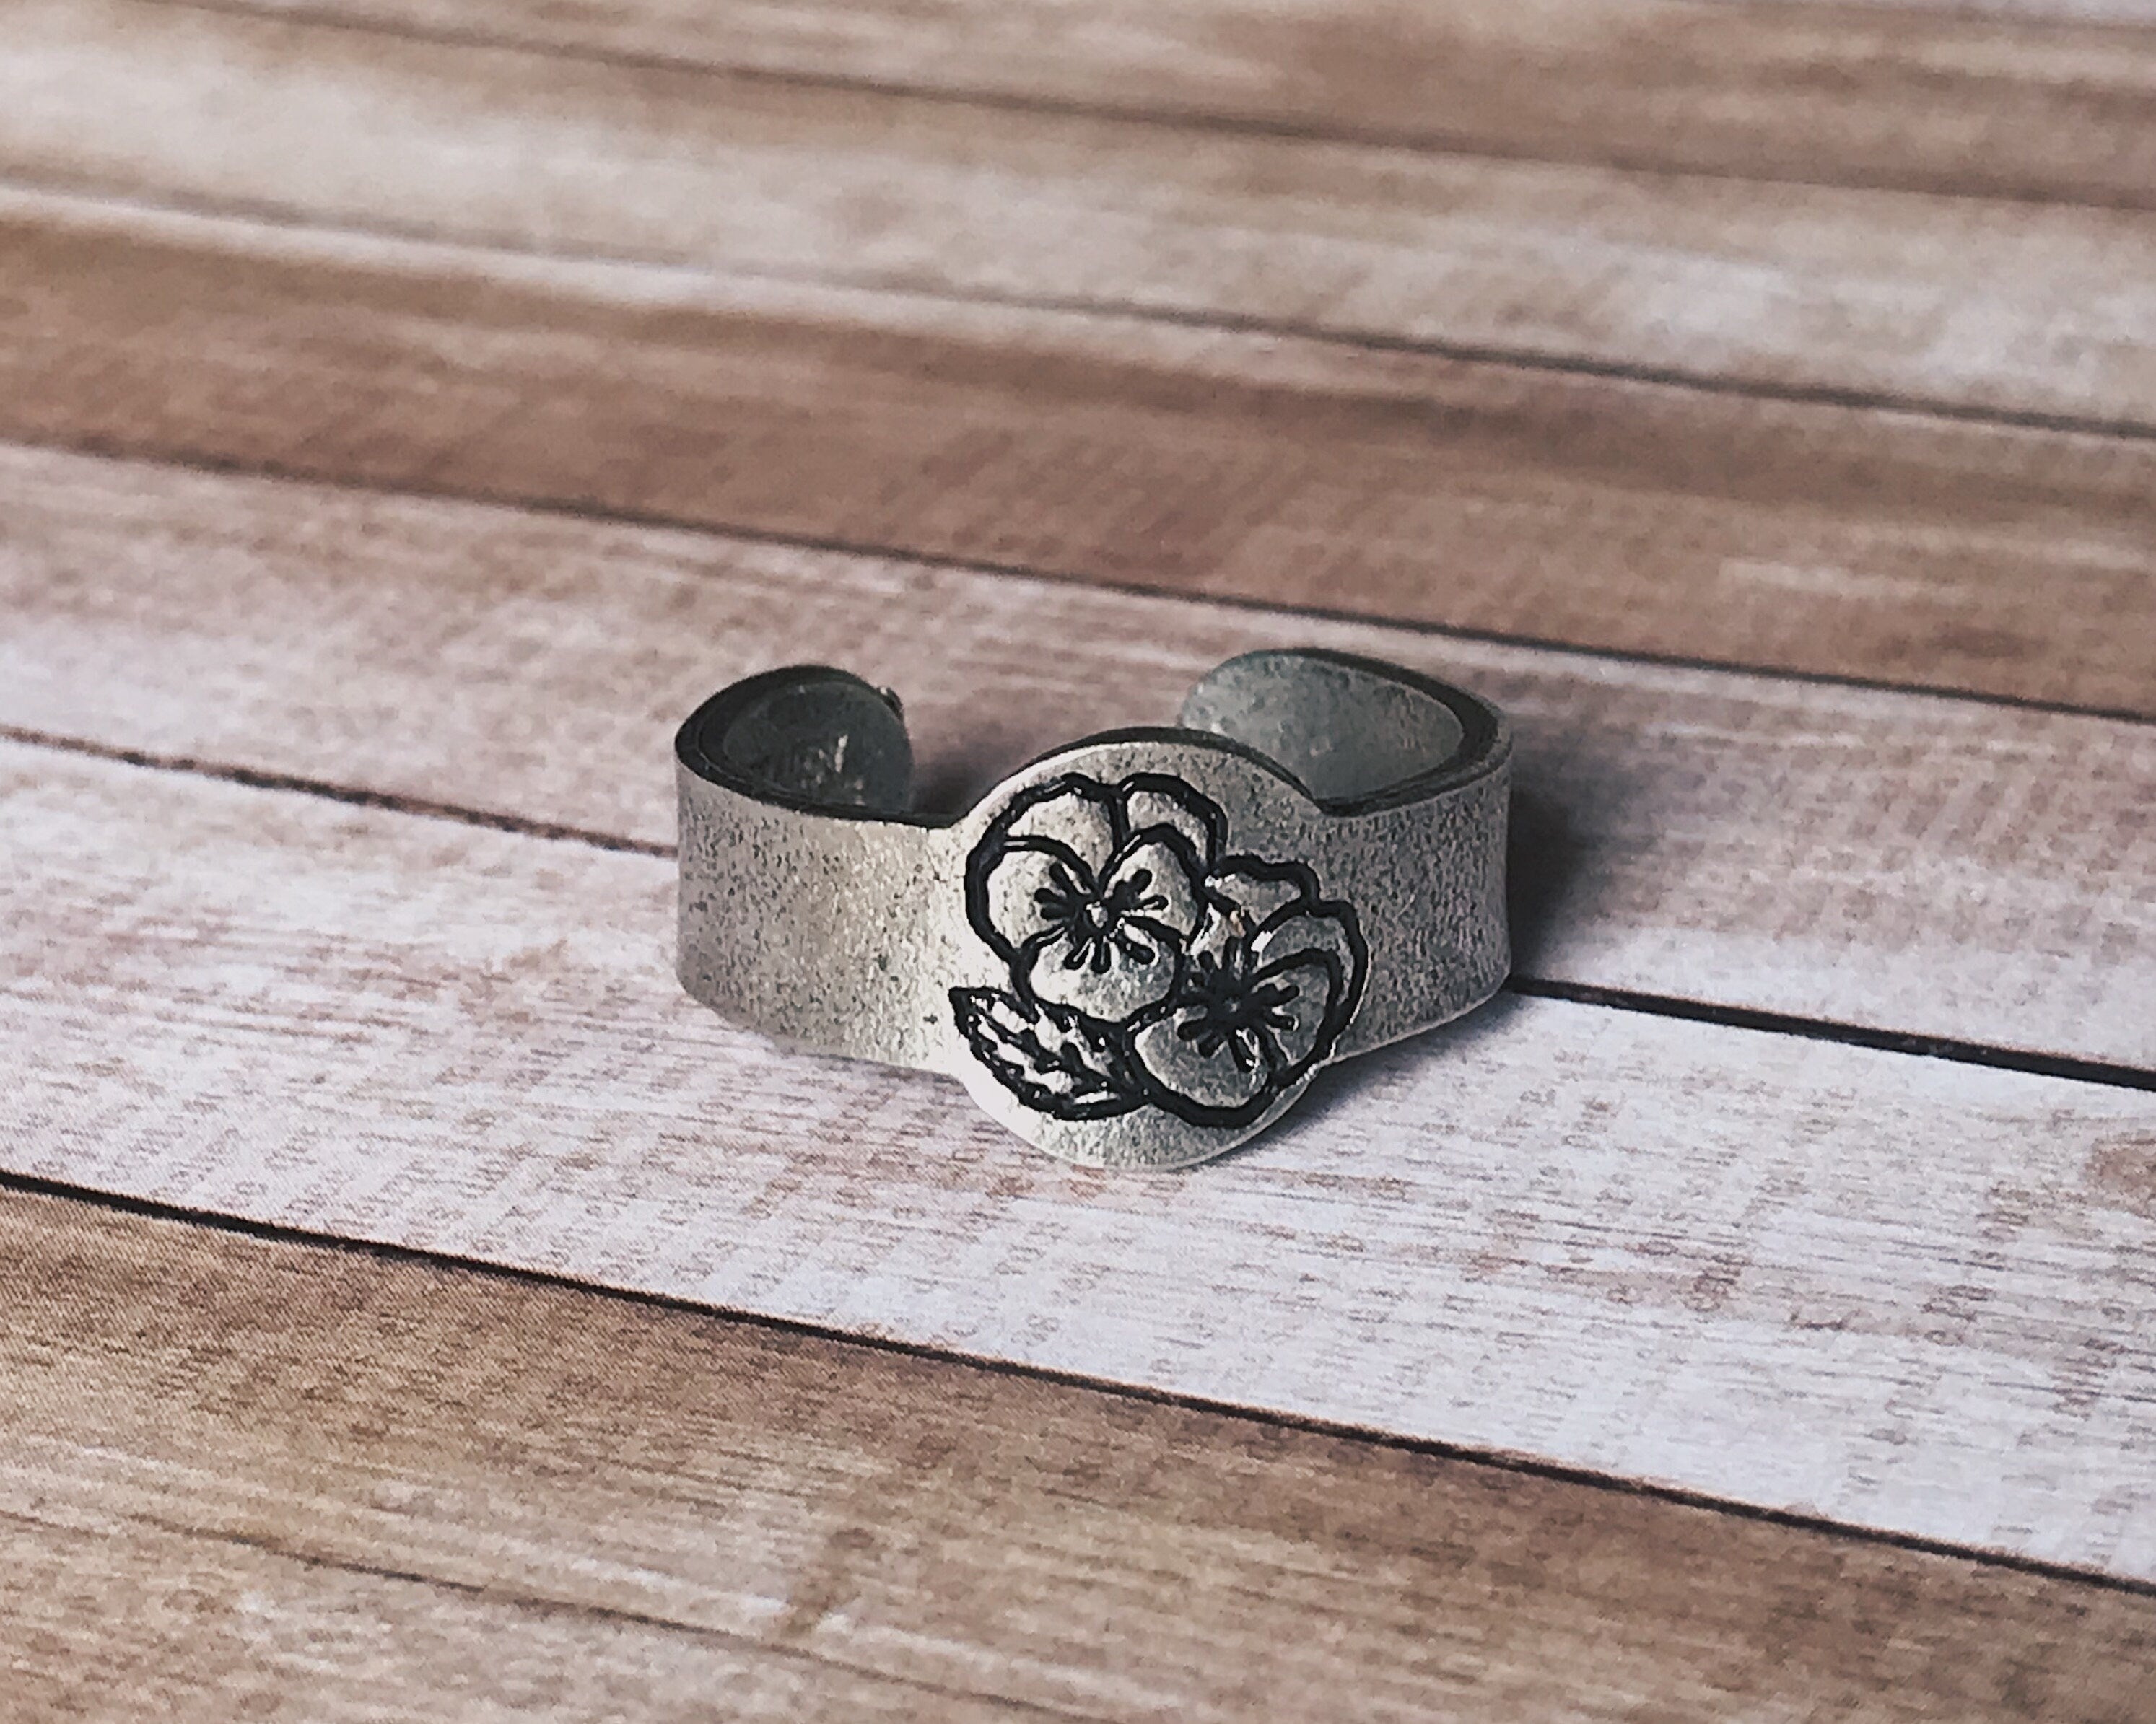 February Birth Flower Ring | Violet Jewelry | Rustic Floral Signet Ring | Best Friend Birthday Gifts | Mother's Day Gift | Best Friend Ring